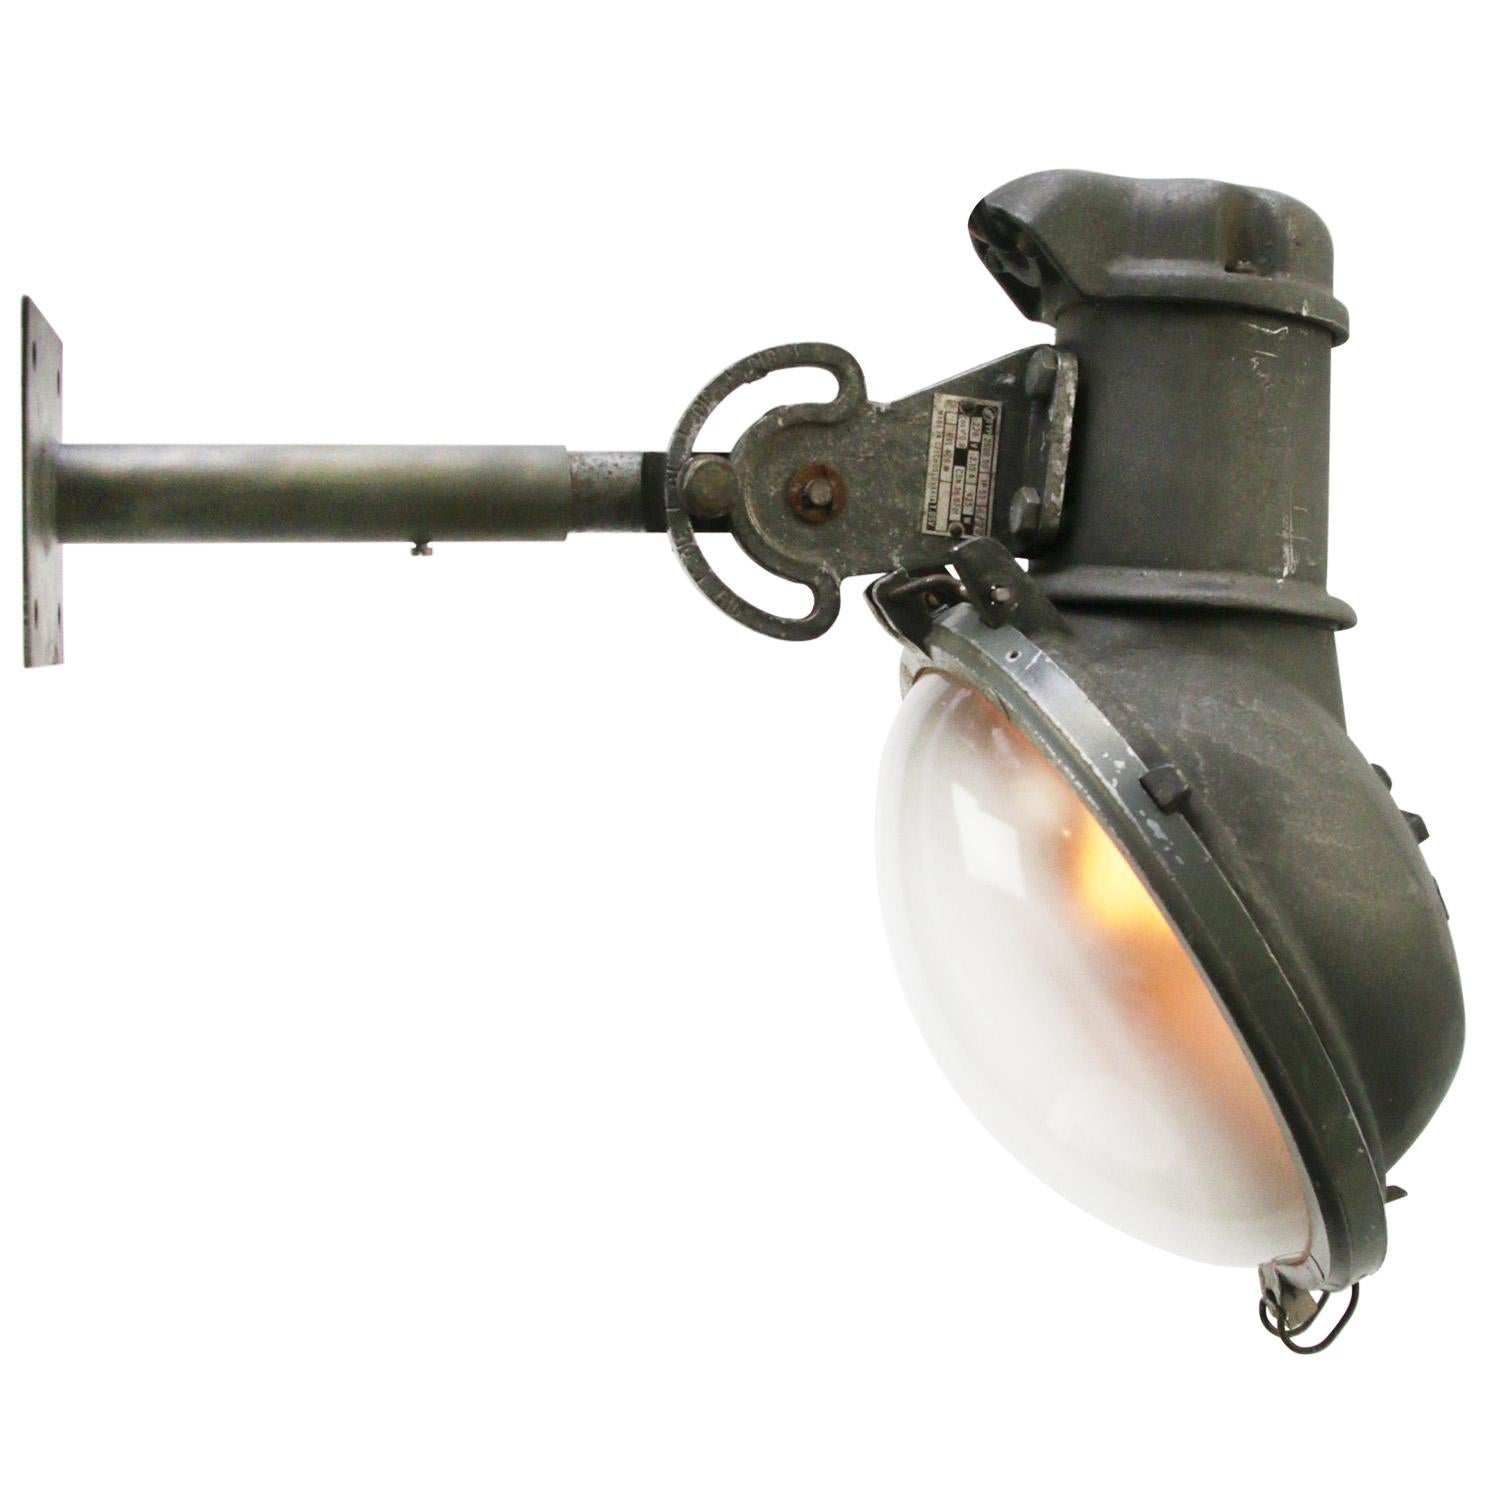 Industrial wall light by Crouse Hinds,Toronto, Canada
Cast aluminum, cast iron and frosted glass.

Not suitable anymore for full rain and snow.

Foot size : 12 × 12 cm

Weight: 6.40 kg / 14.1 lb

Priced per individual item. All lamps have been made